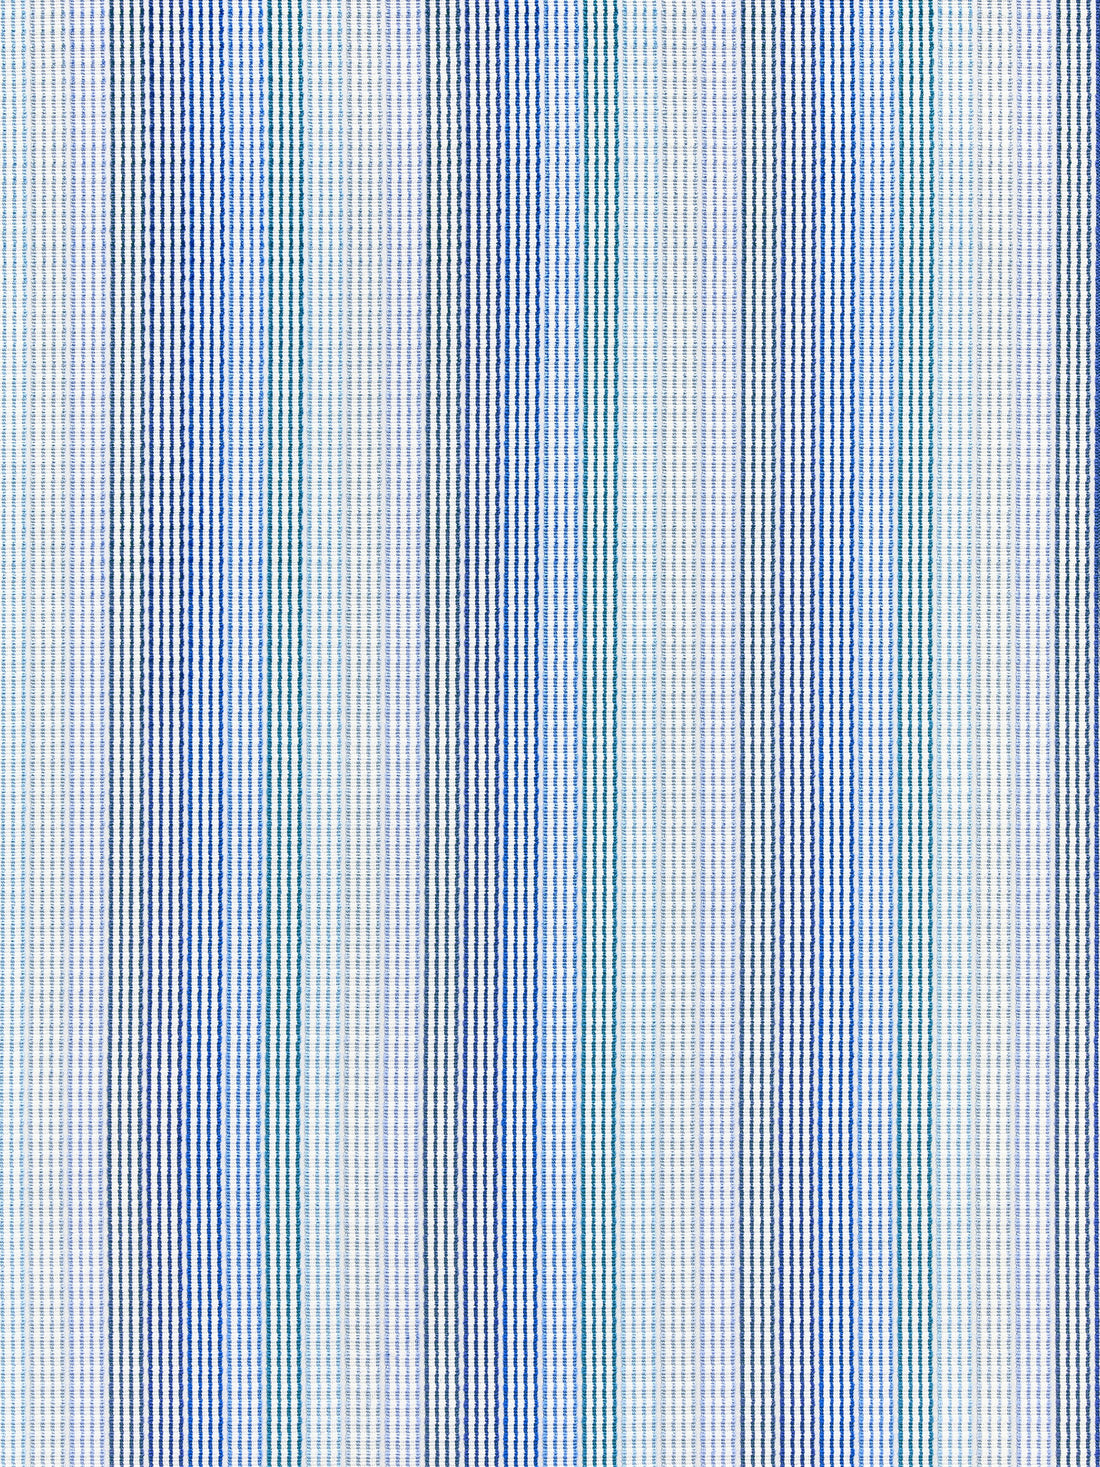 Anderson Velvet Stripe fabric in river color - pattern number GW 000227244 - by Scalamandre in the Grey Watkins collection